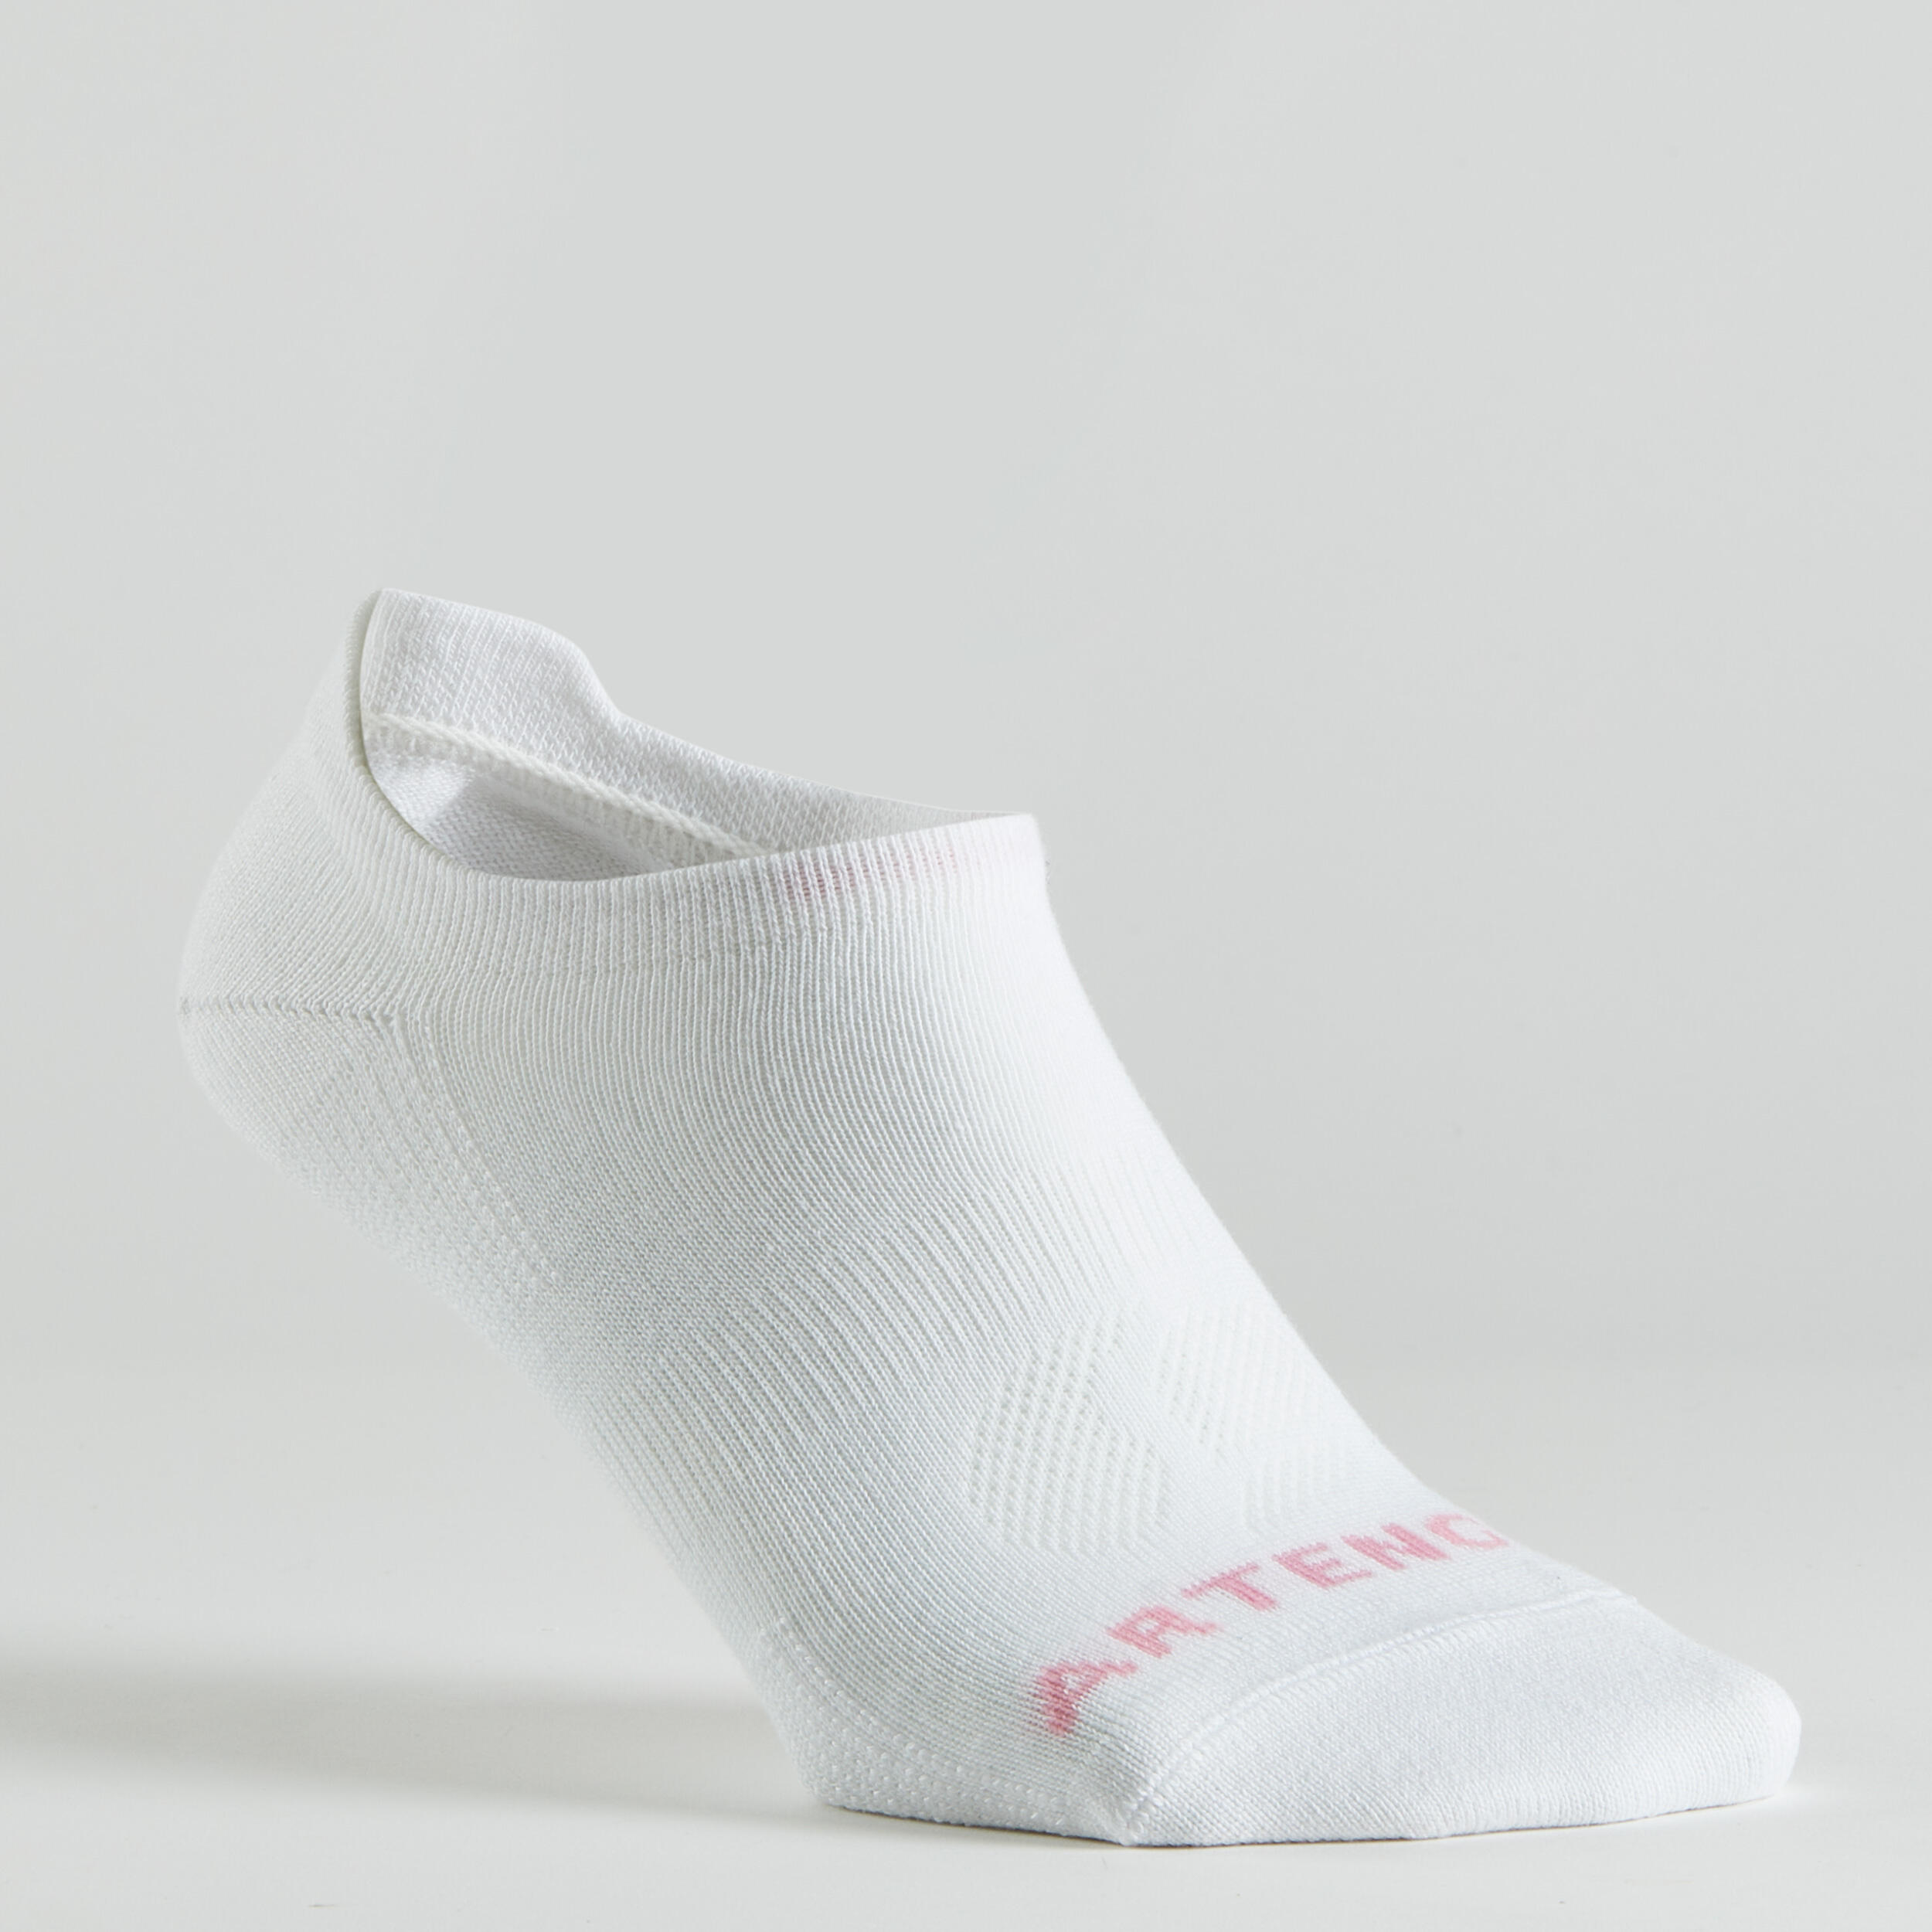 Low Sports Socks RS 160 Tri-Pack - Pink/White/China Blue 3/14